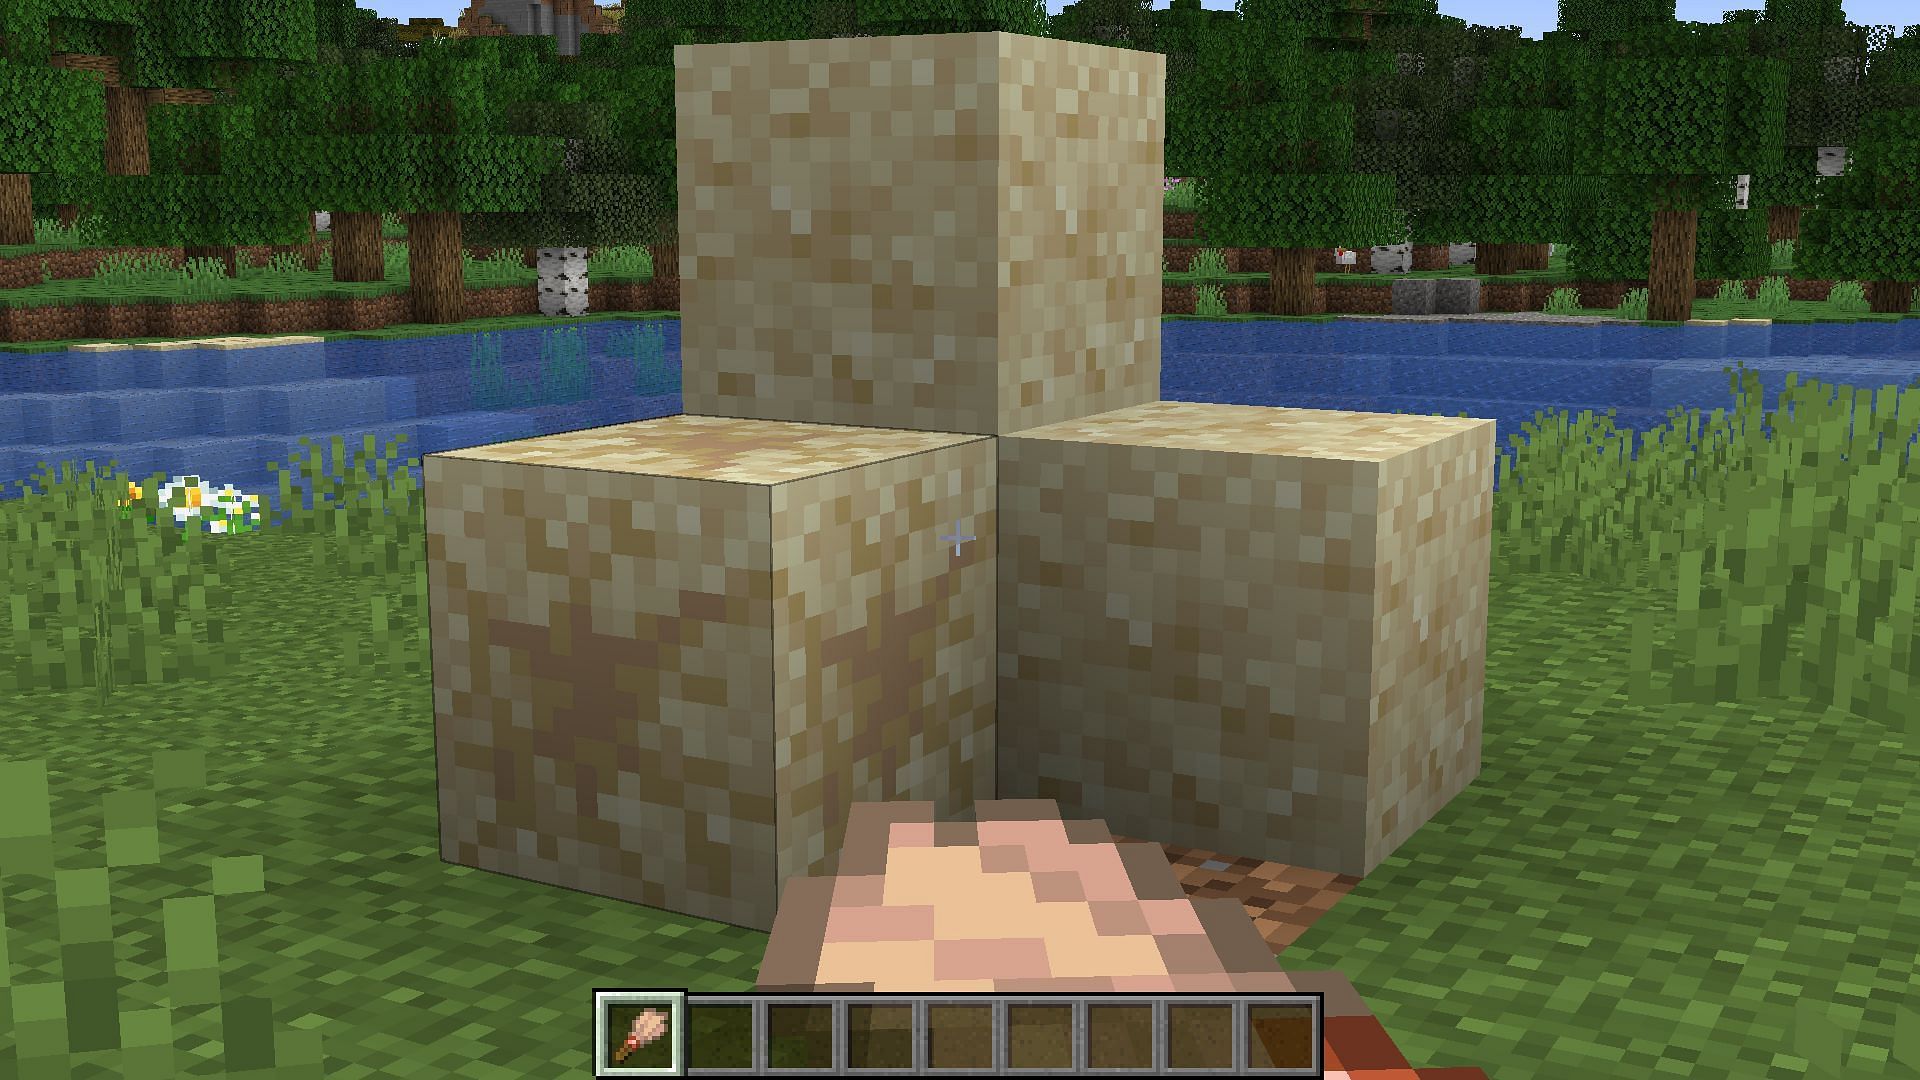 Sniffer eggs will now be found in suspicious sand and gravel blocks in Minecraft 1.20 Trails and Tales update (Image via Mojang)